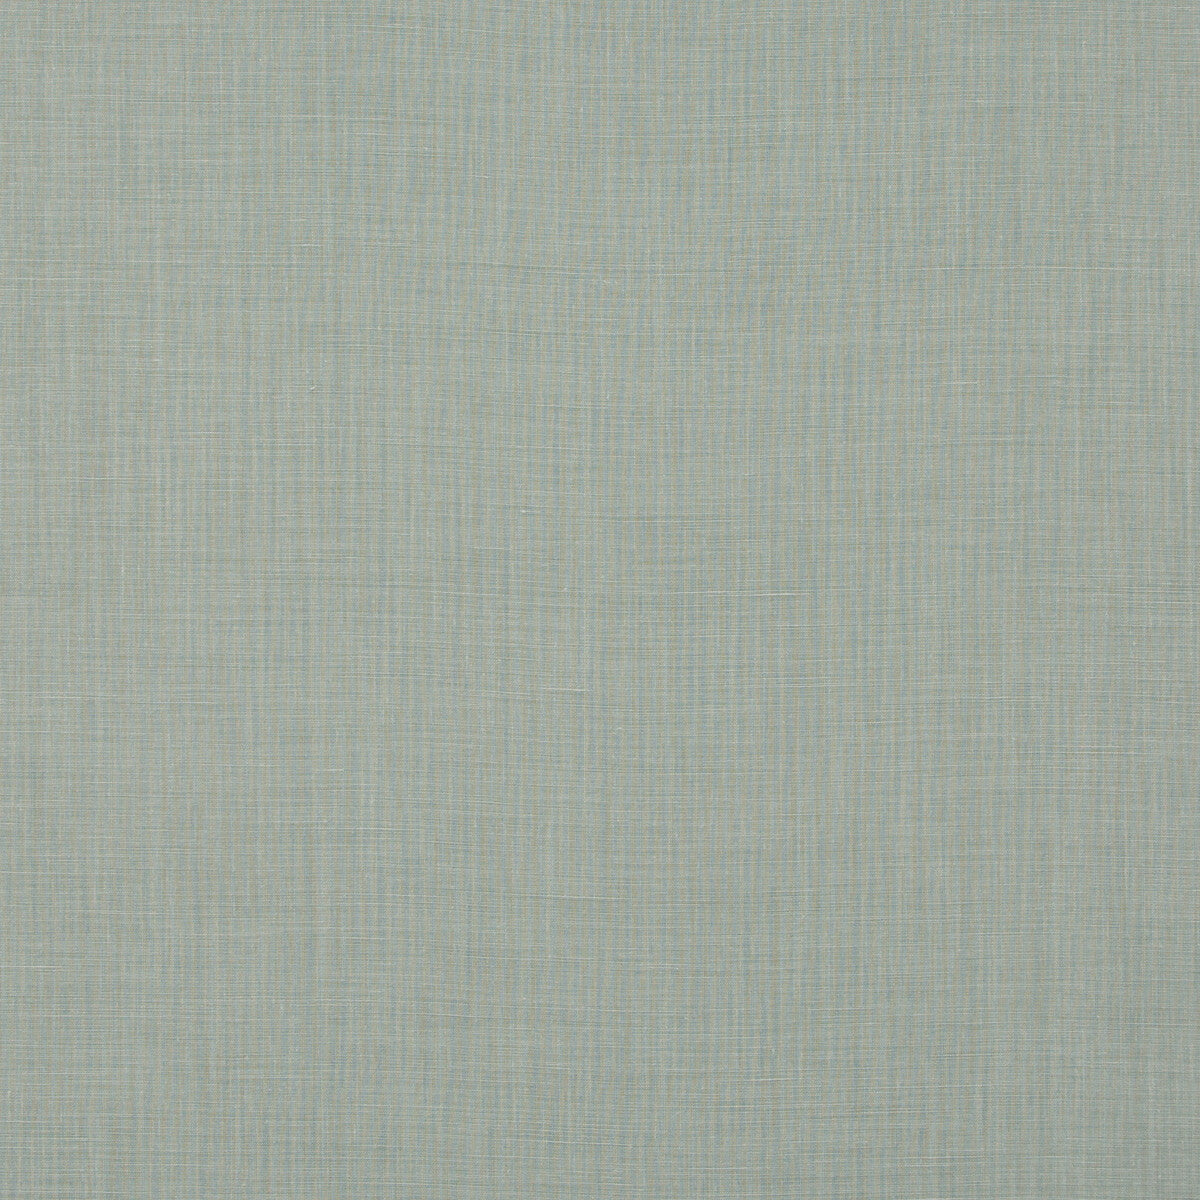 Baker House Linen fabric in sea foam color - pattern BF10961.721.0 - by G P &amp; J Baker in the Baker House Linens collection